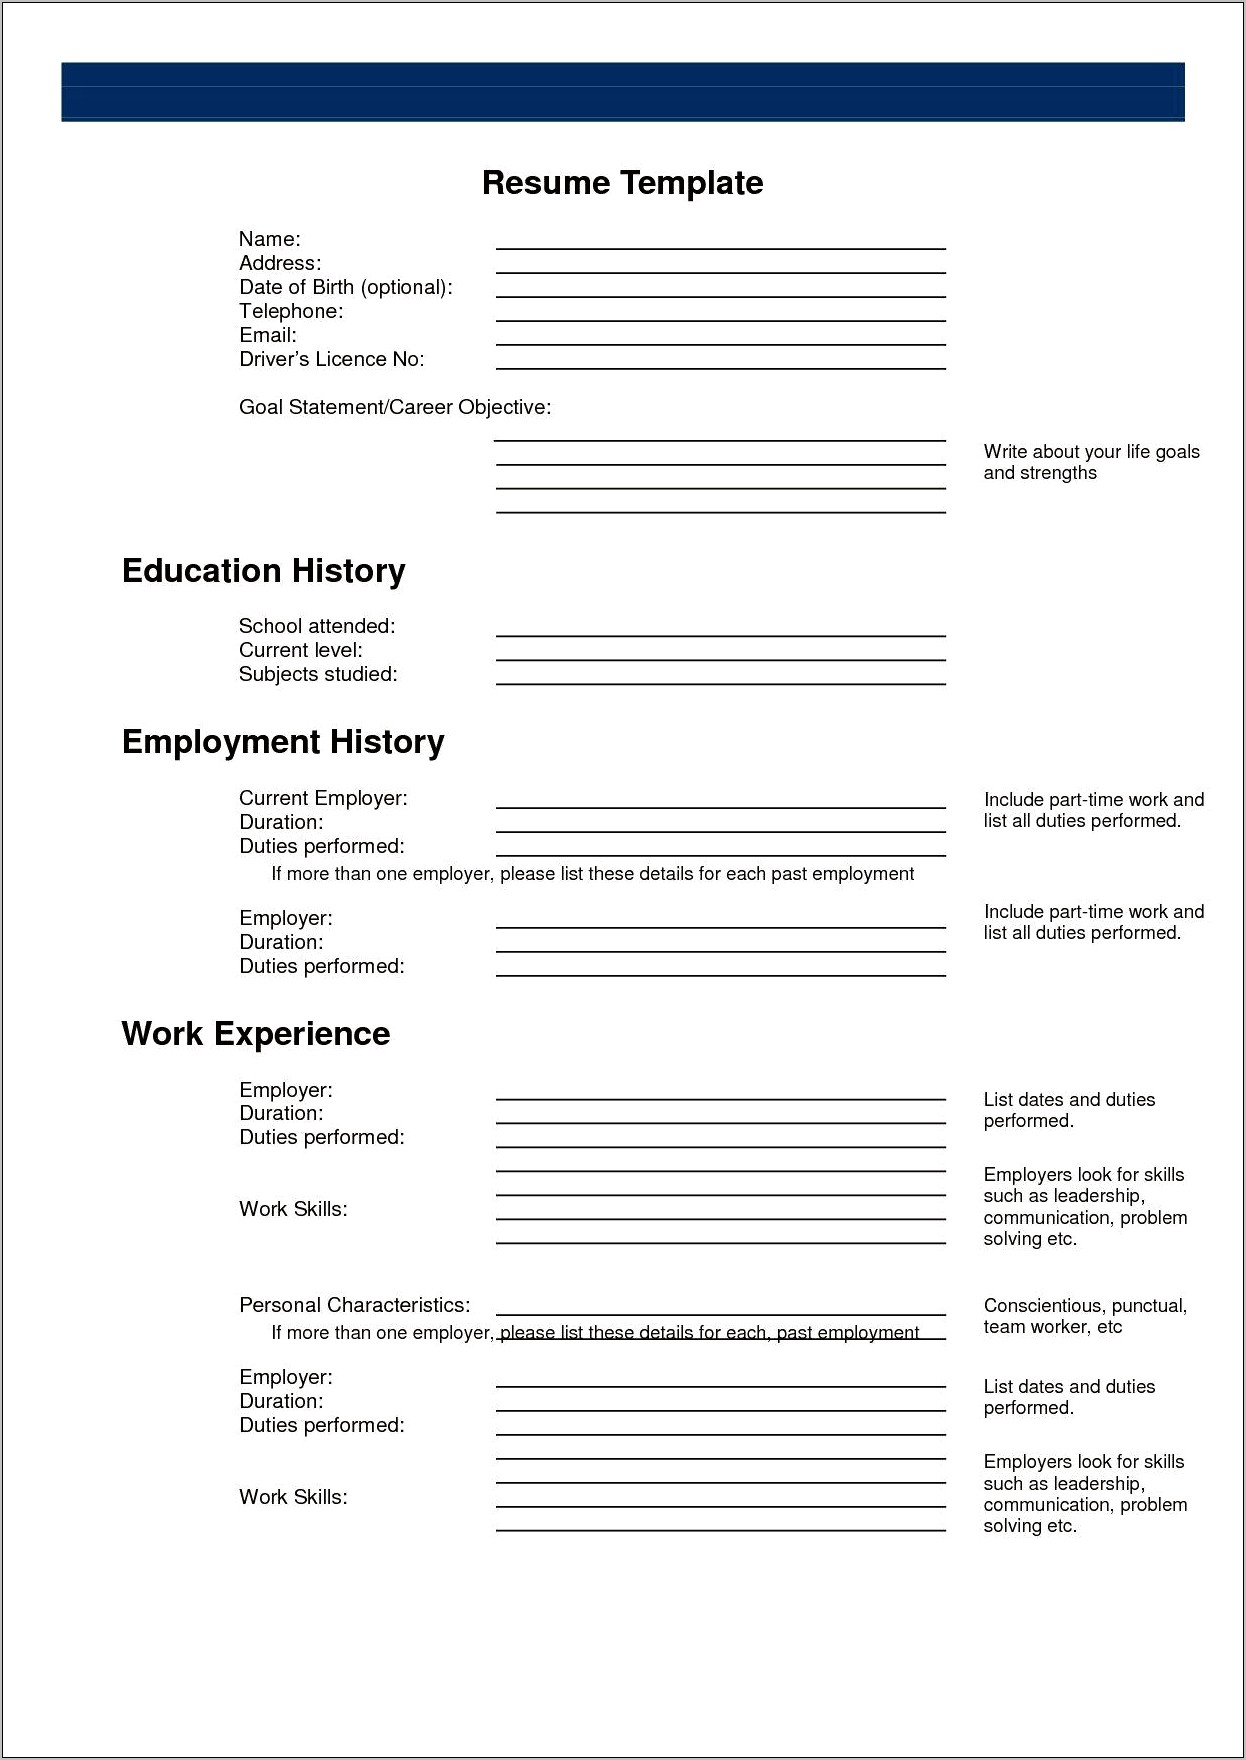 free-fill-in-the-blank-resume-samples-resume-example-gallery